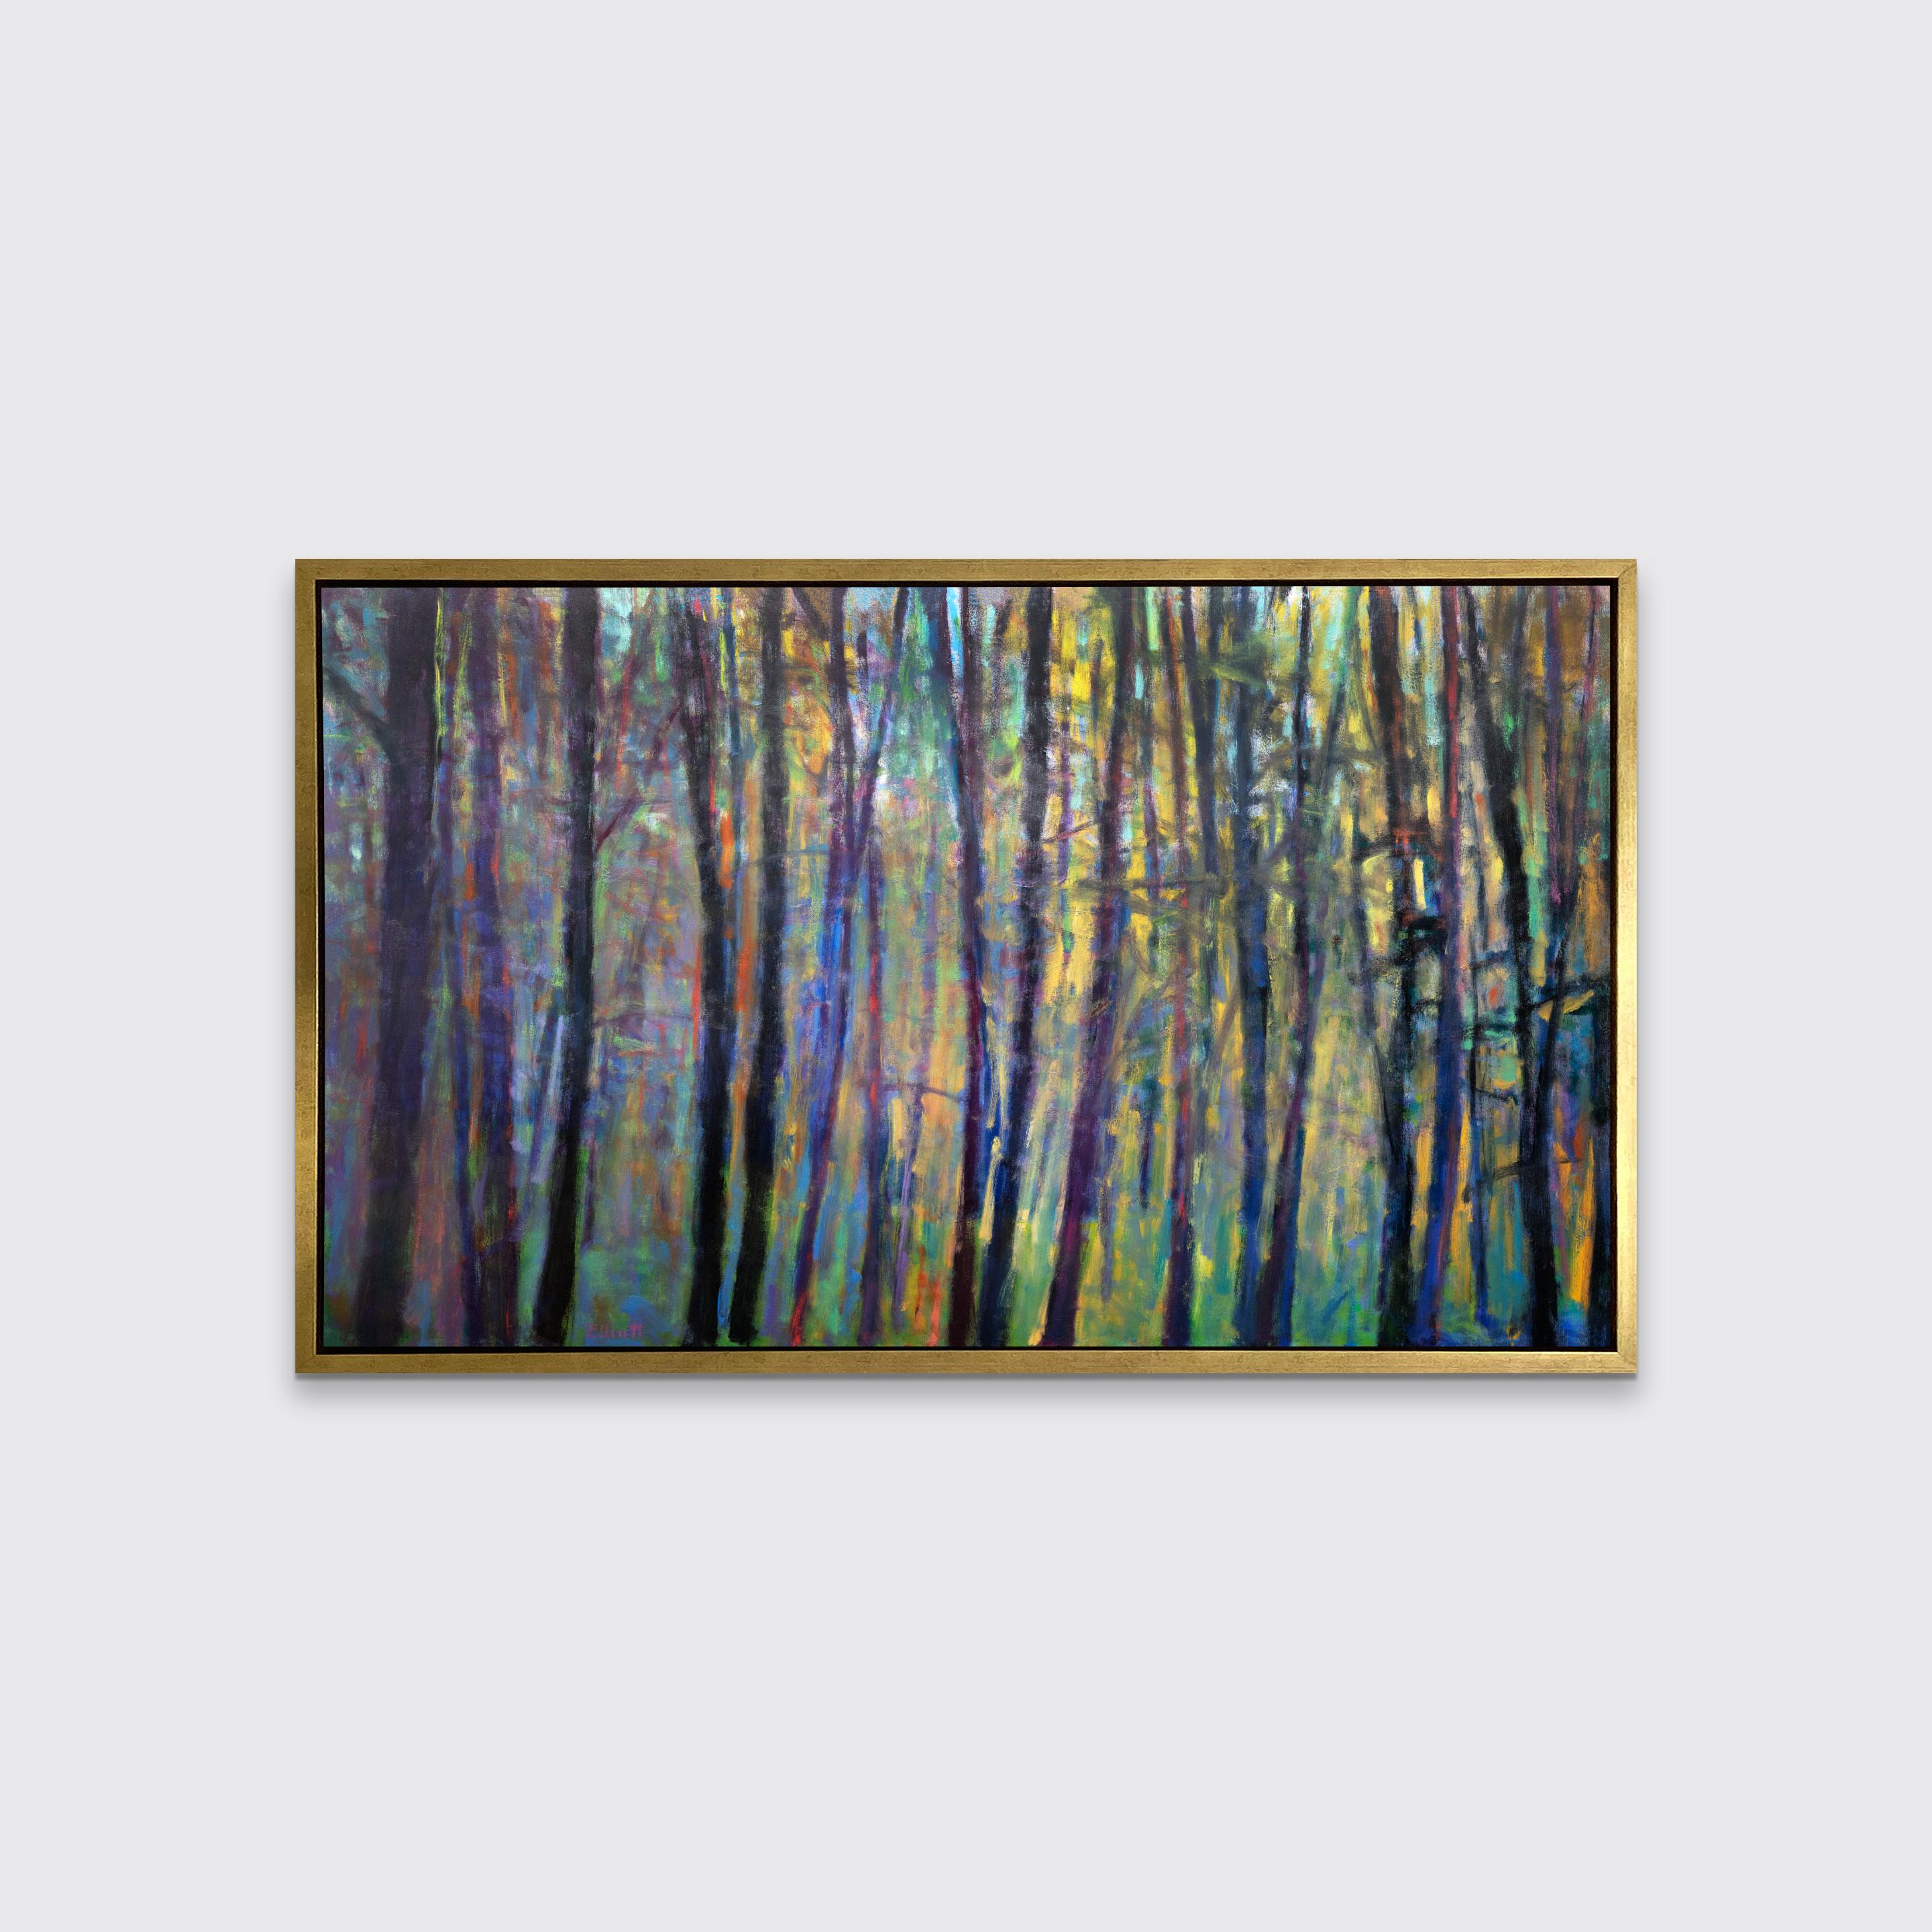 This contemporary abstract landscape limited edition print by Ken Elliott features multi-colored tree trunks and foliage extend from the bottom of the canvas up to the top, with a range of color combining in energized strokes to create the feeling